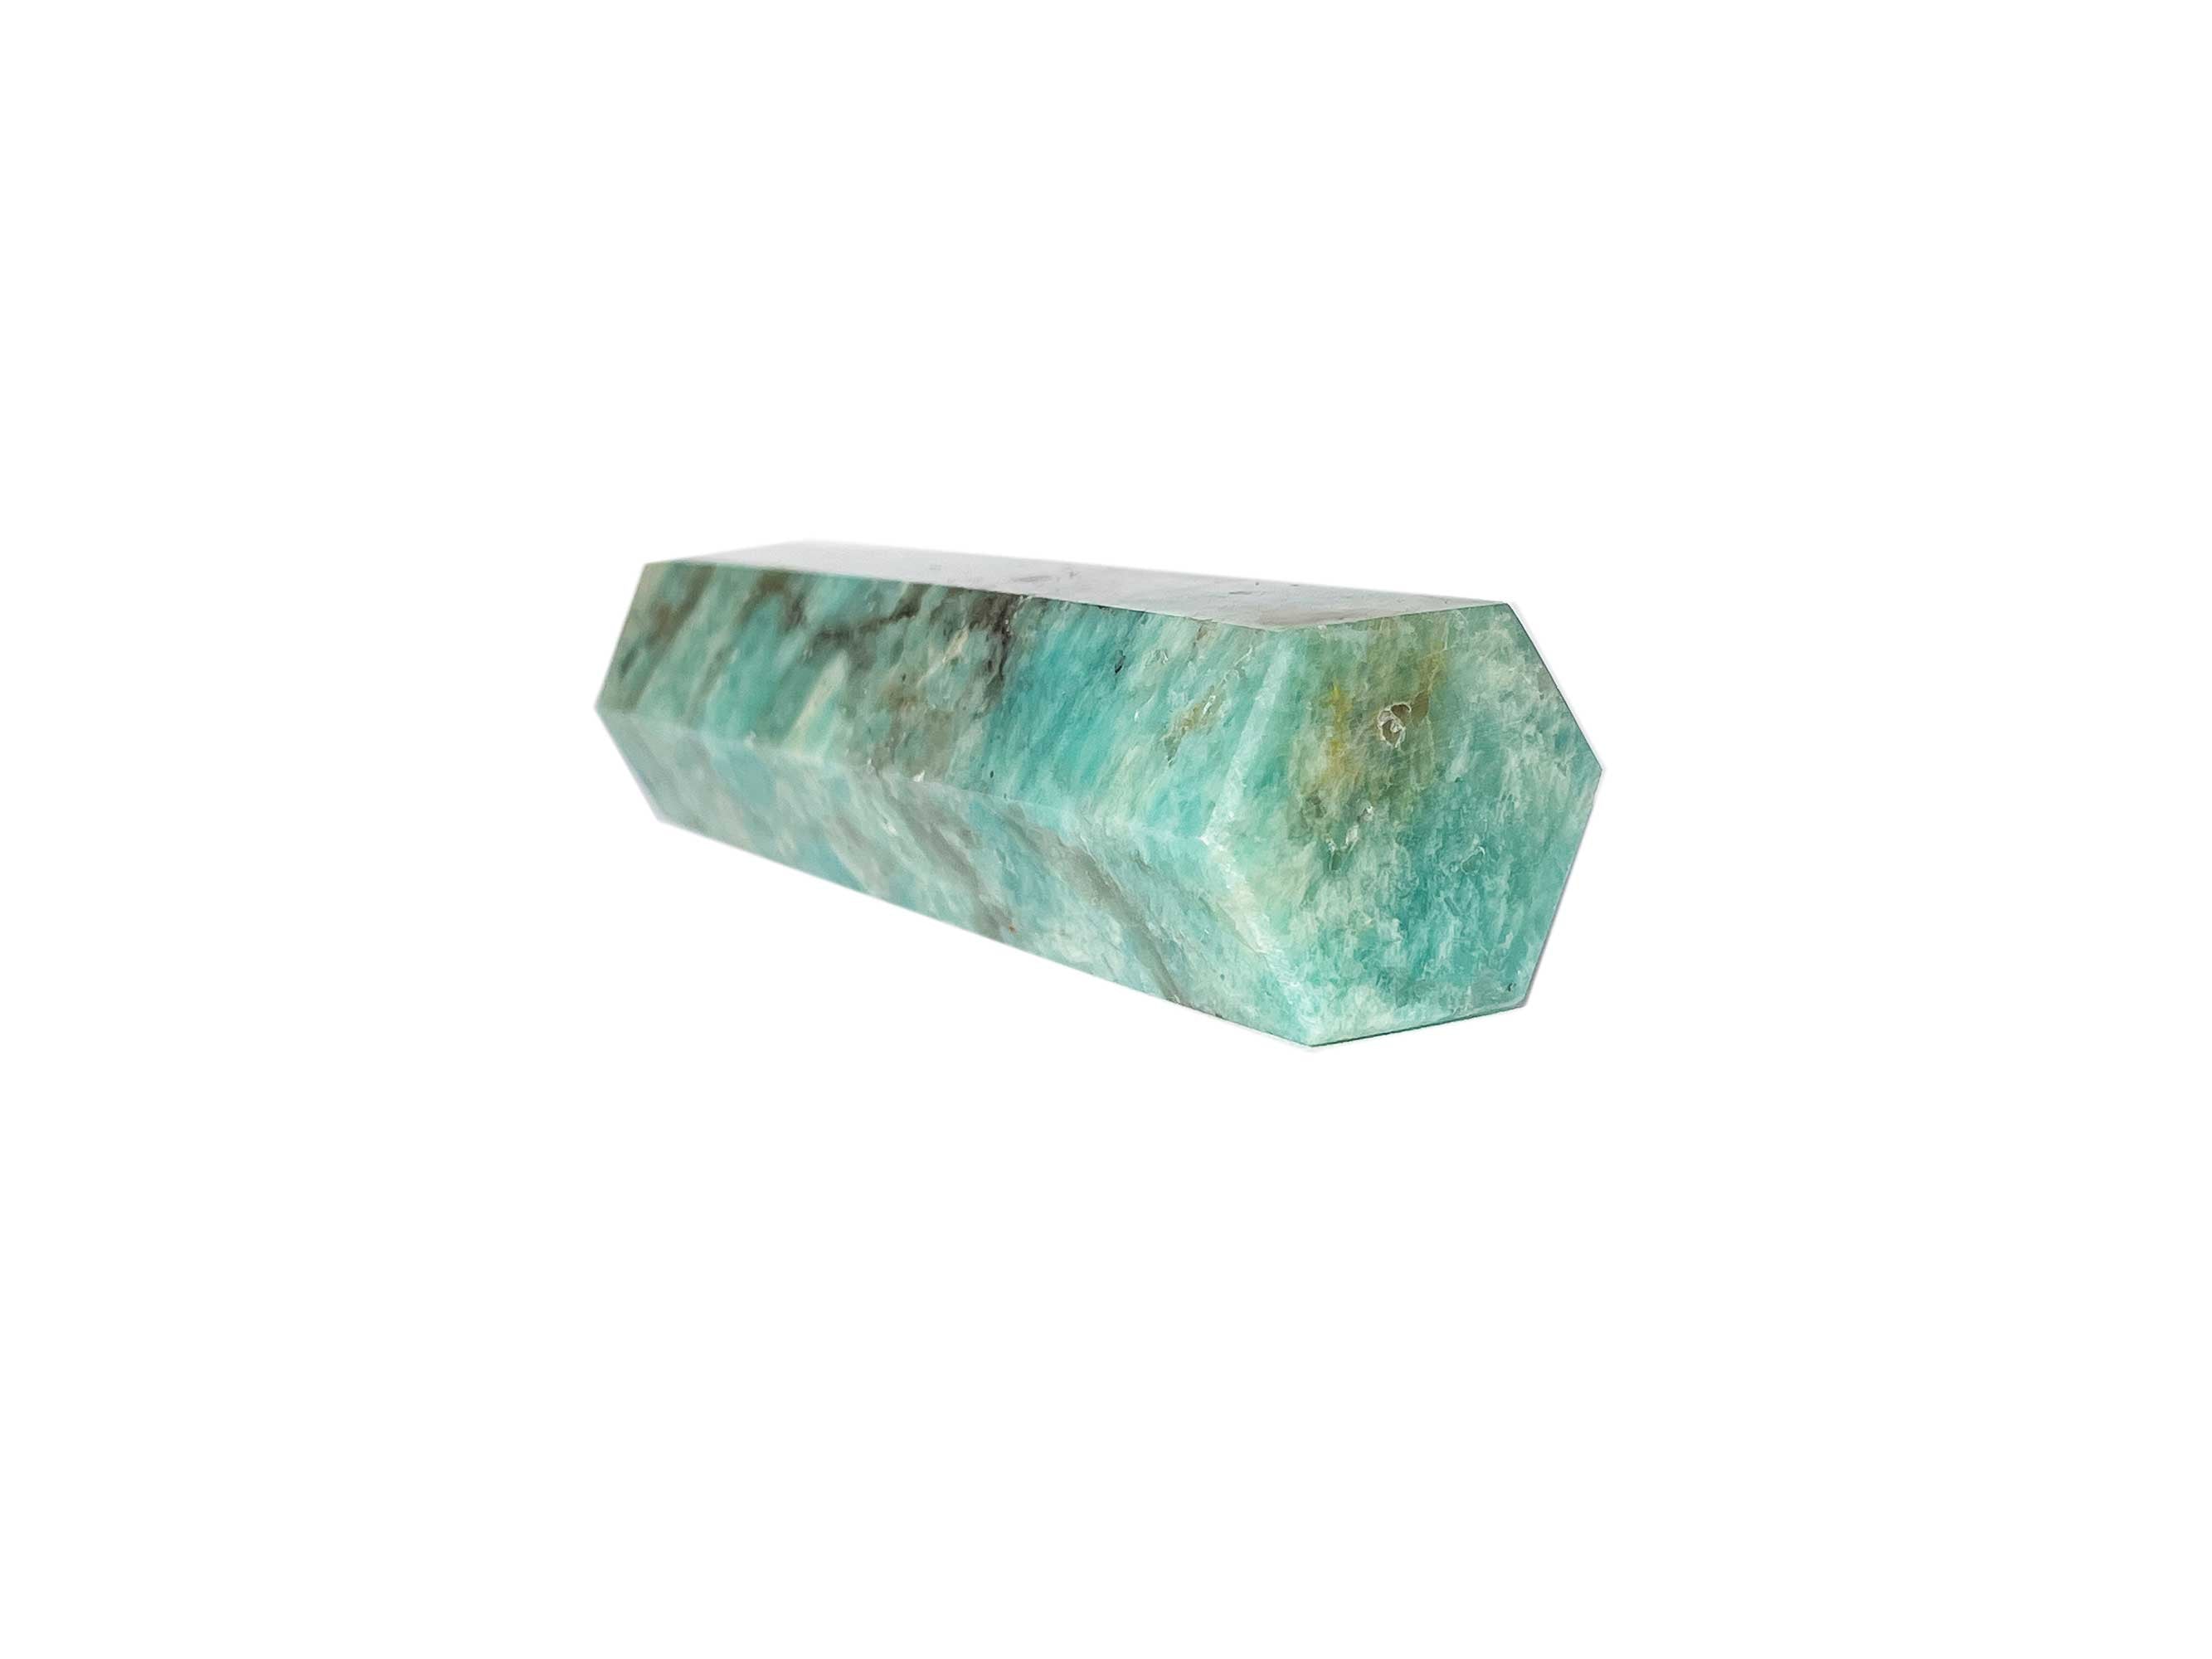 Buy Online Latest and Unique Amazonite Crystal Tower Point | Shop Best Spiritual Items - The Mystical Ritual